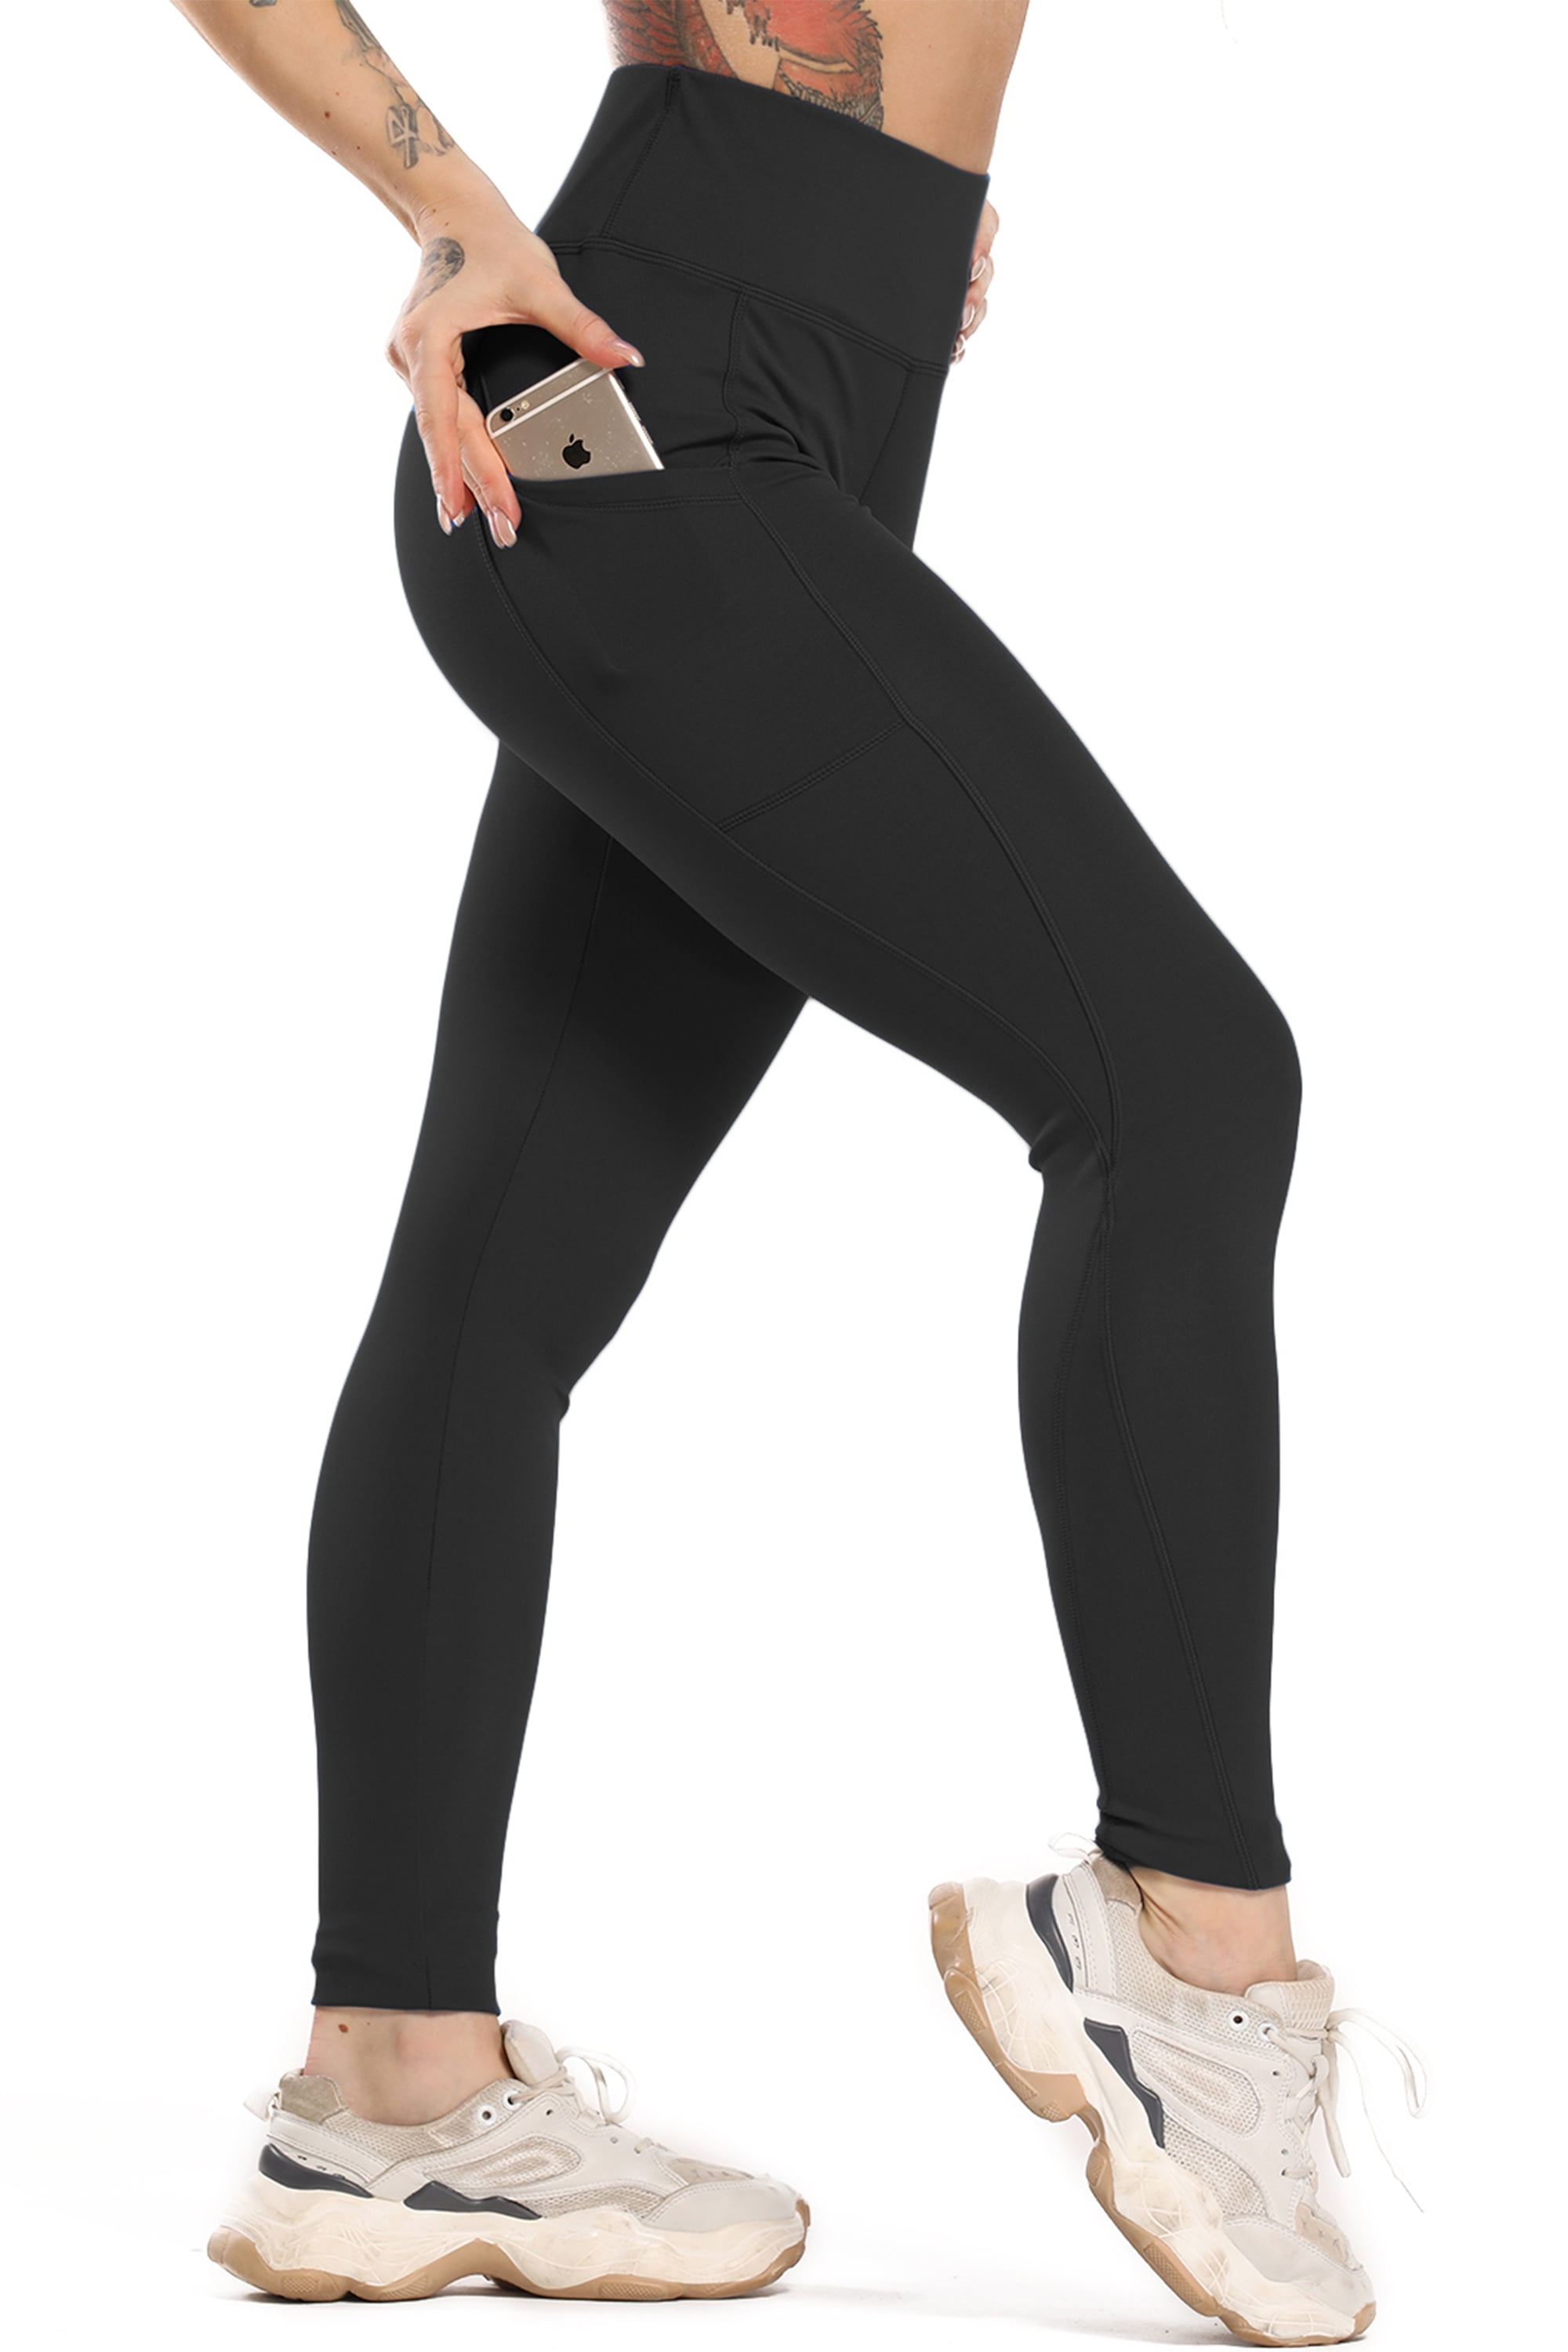 GetUSCart- Dragon Fit High Waist Yoga Leggings with 3 Pockets,Tummy Control  Workout Running 4 Way Stretch Yoga Pants (Large, Black Leopard)